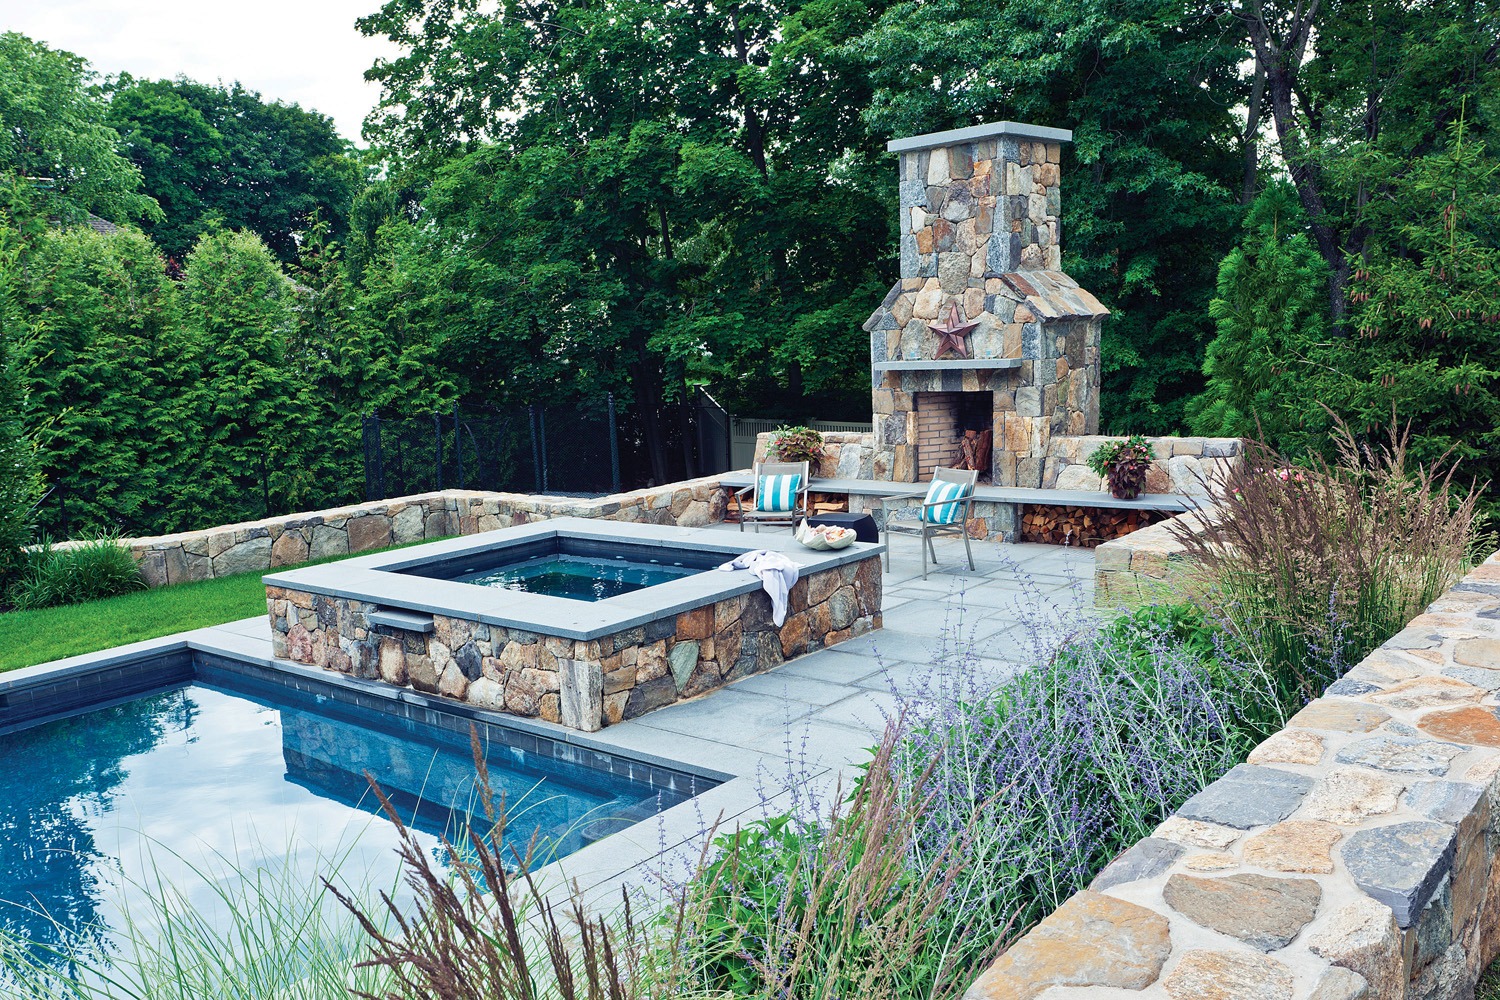 An outdoor space featuring a rectangular swimming pool, an integrated hot tub, a stone fireplace, patio chairs, surrounded by lush greenery and fencing.